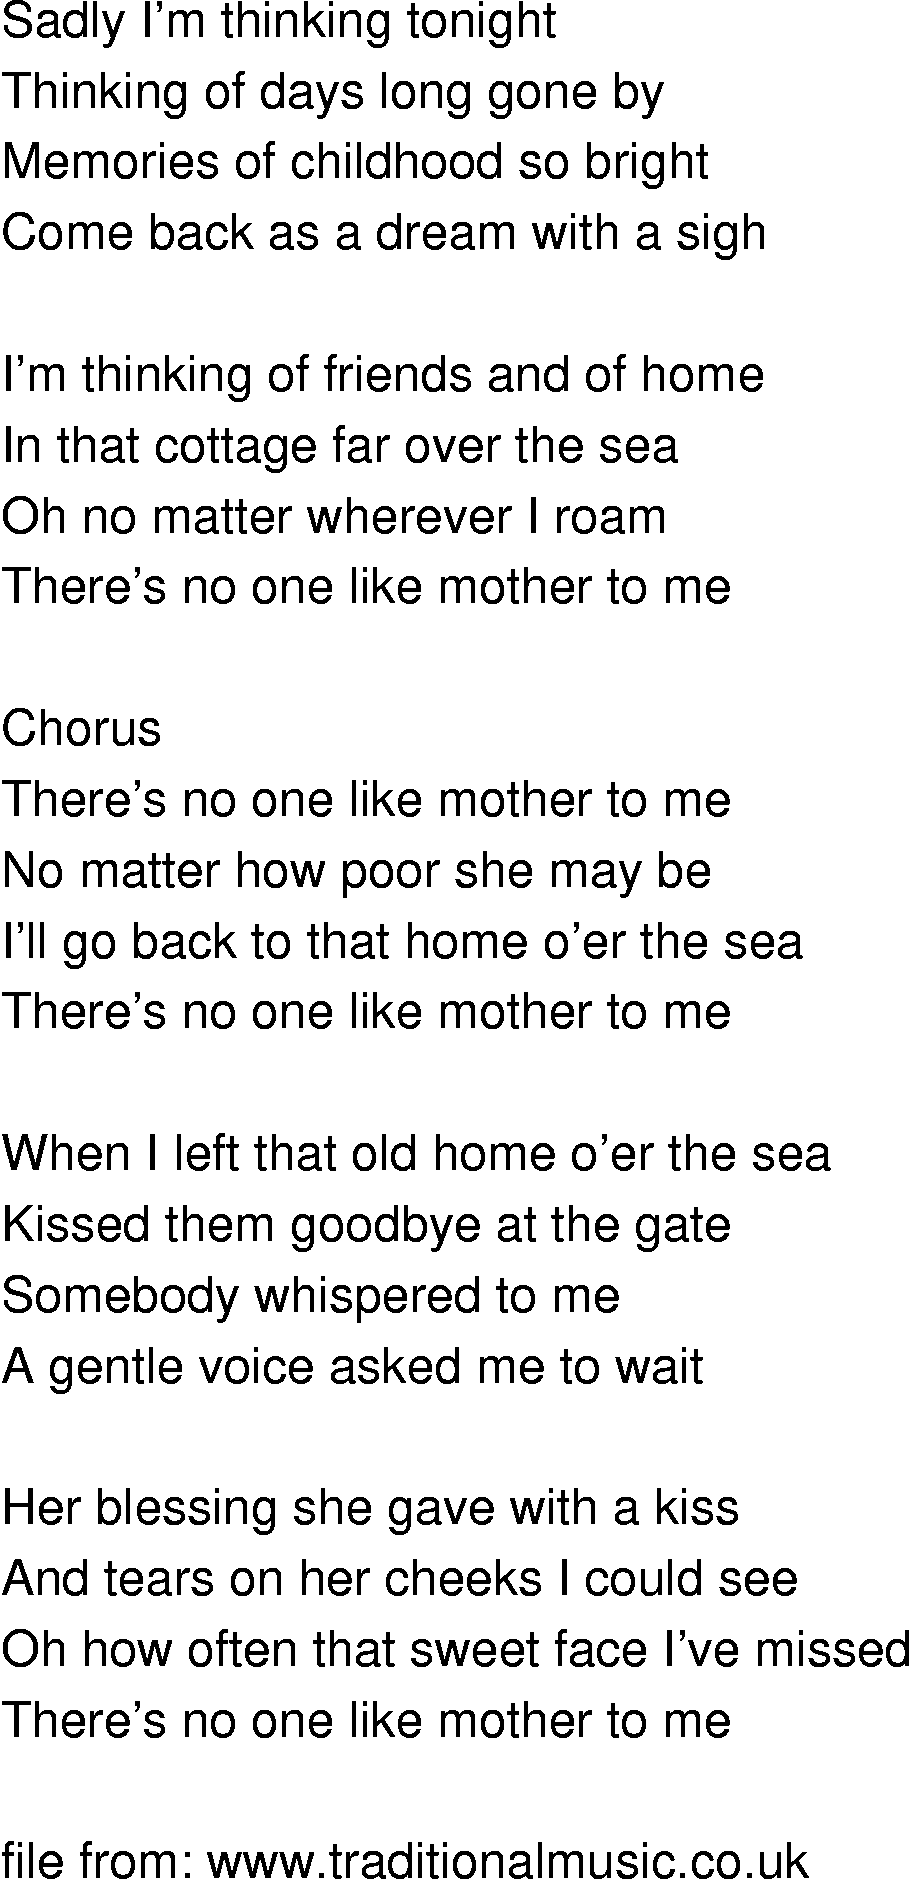 Old-Time (oldtimey) Song Lyrics - theres no one like mother to me